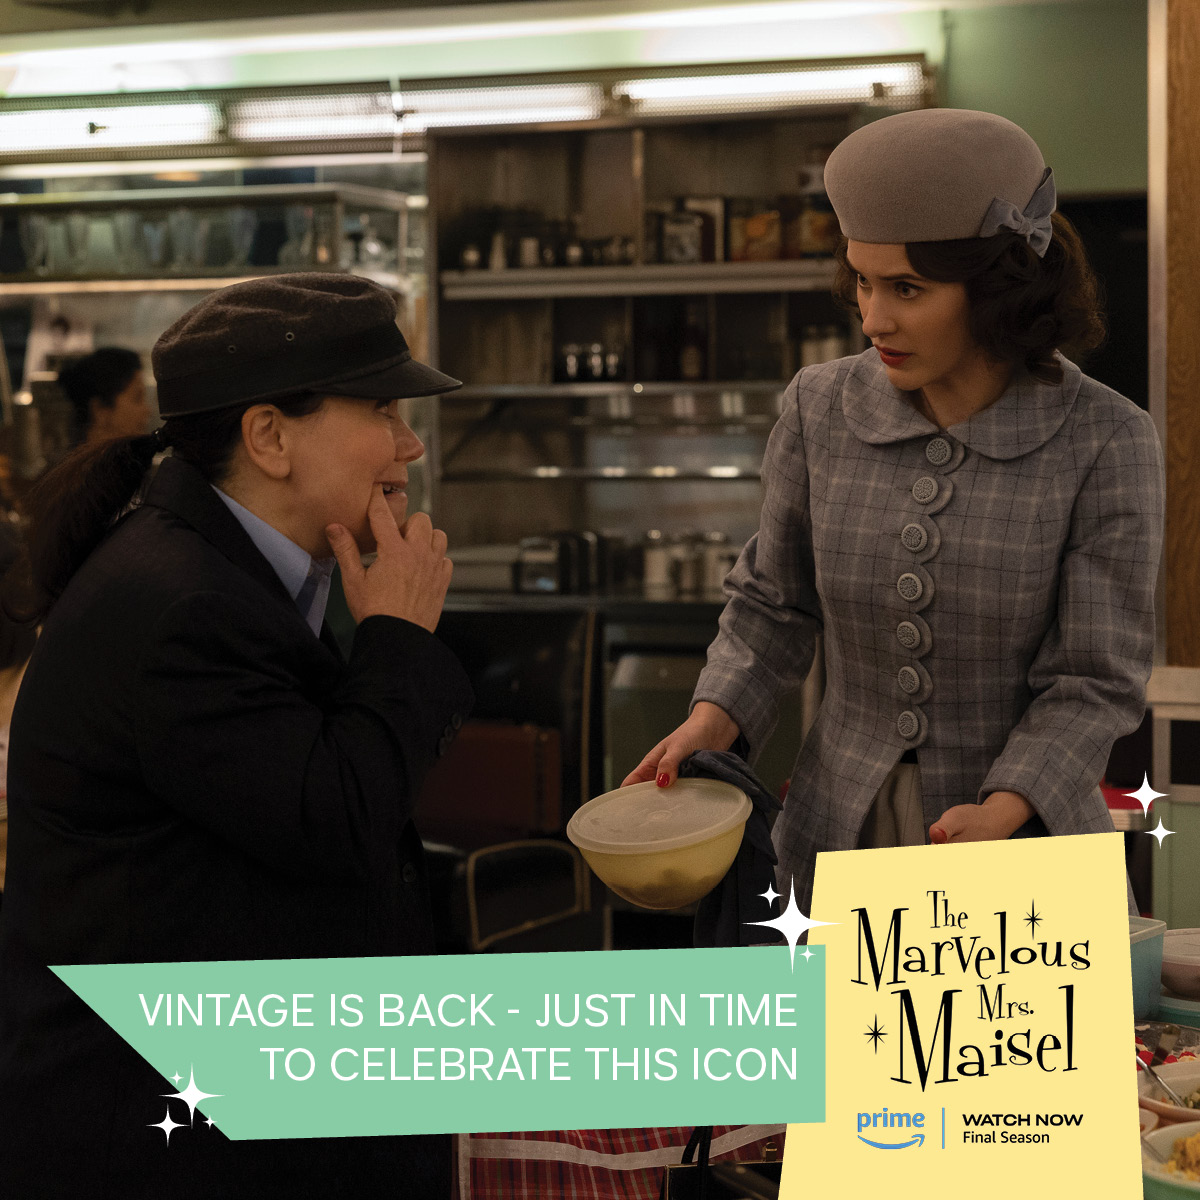 The Marvelous Mrs. Maisel' x Tupperware Is On Sale for Season 5